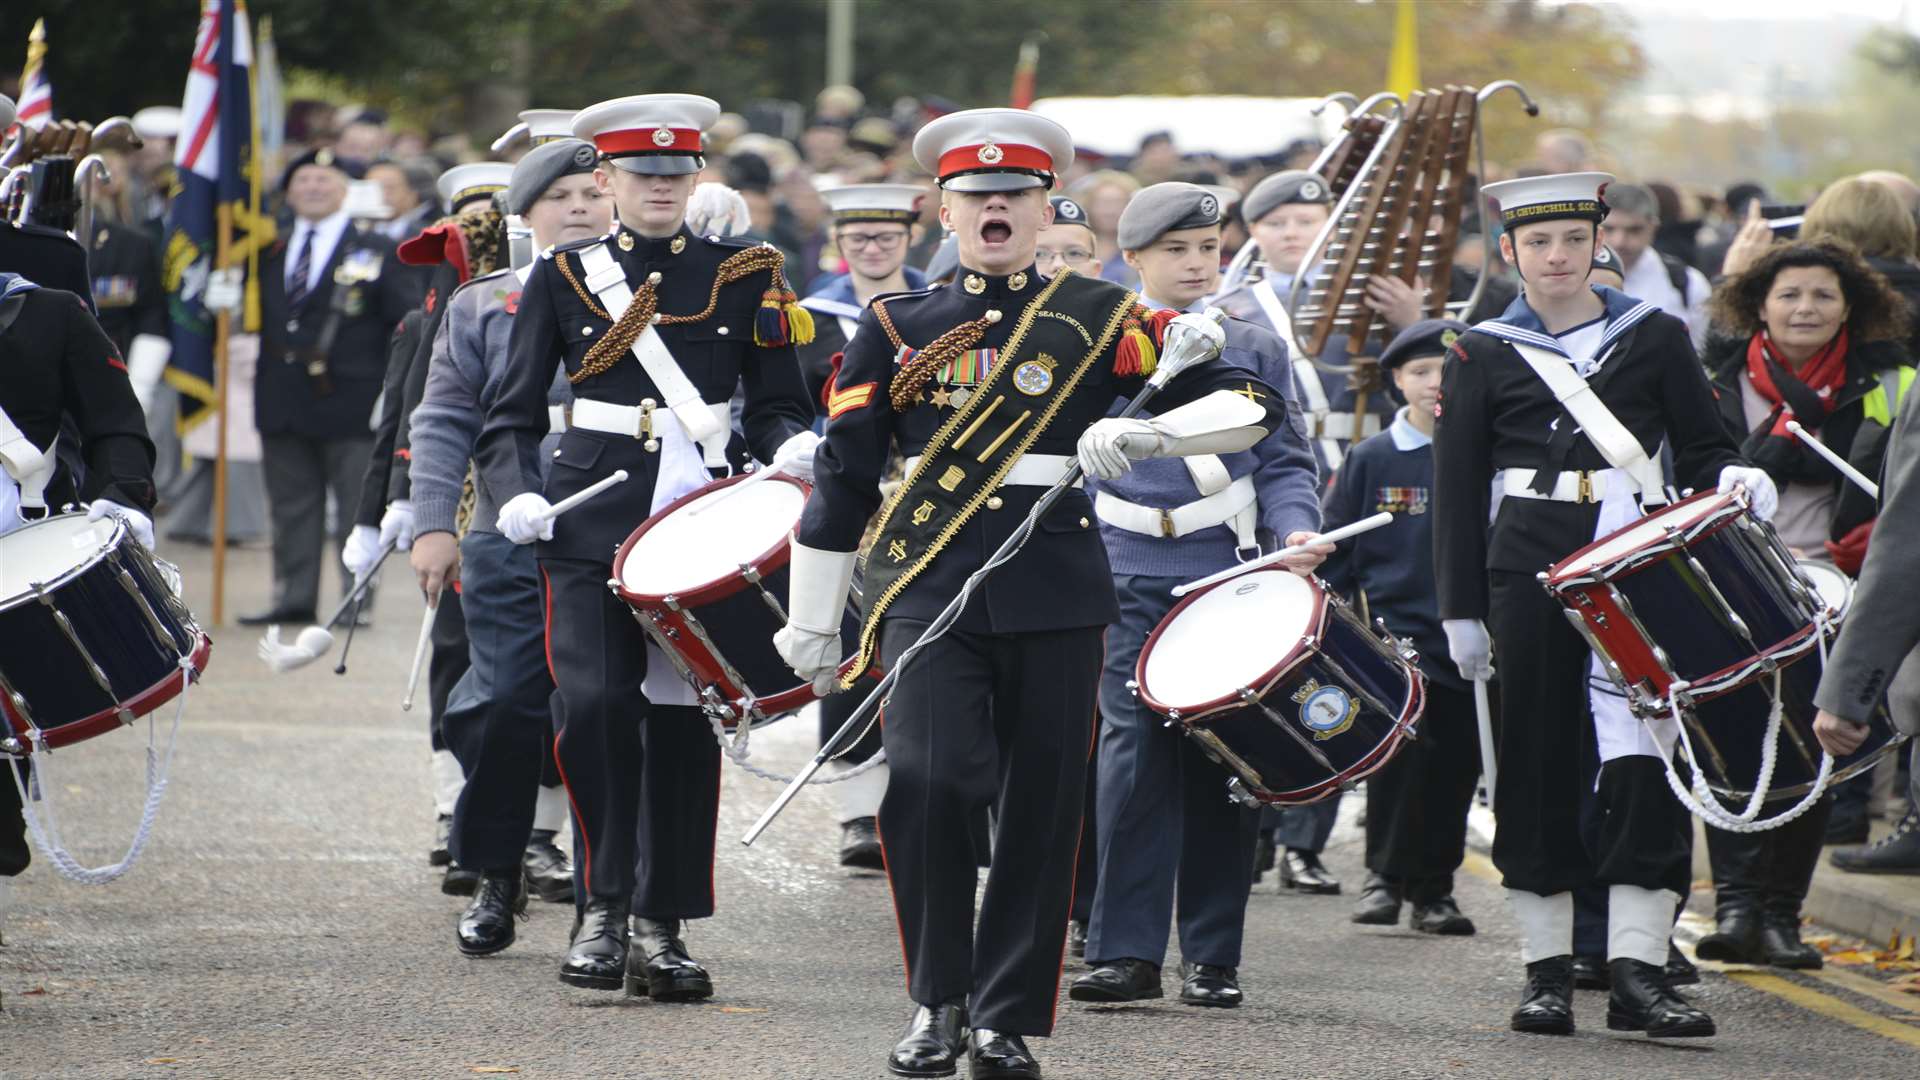 The Sea Cadets Band led the parade after the service.